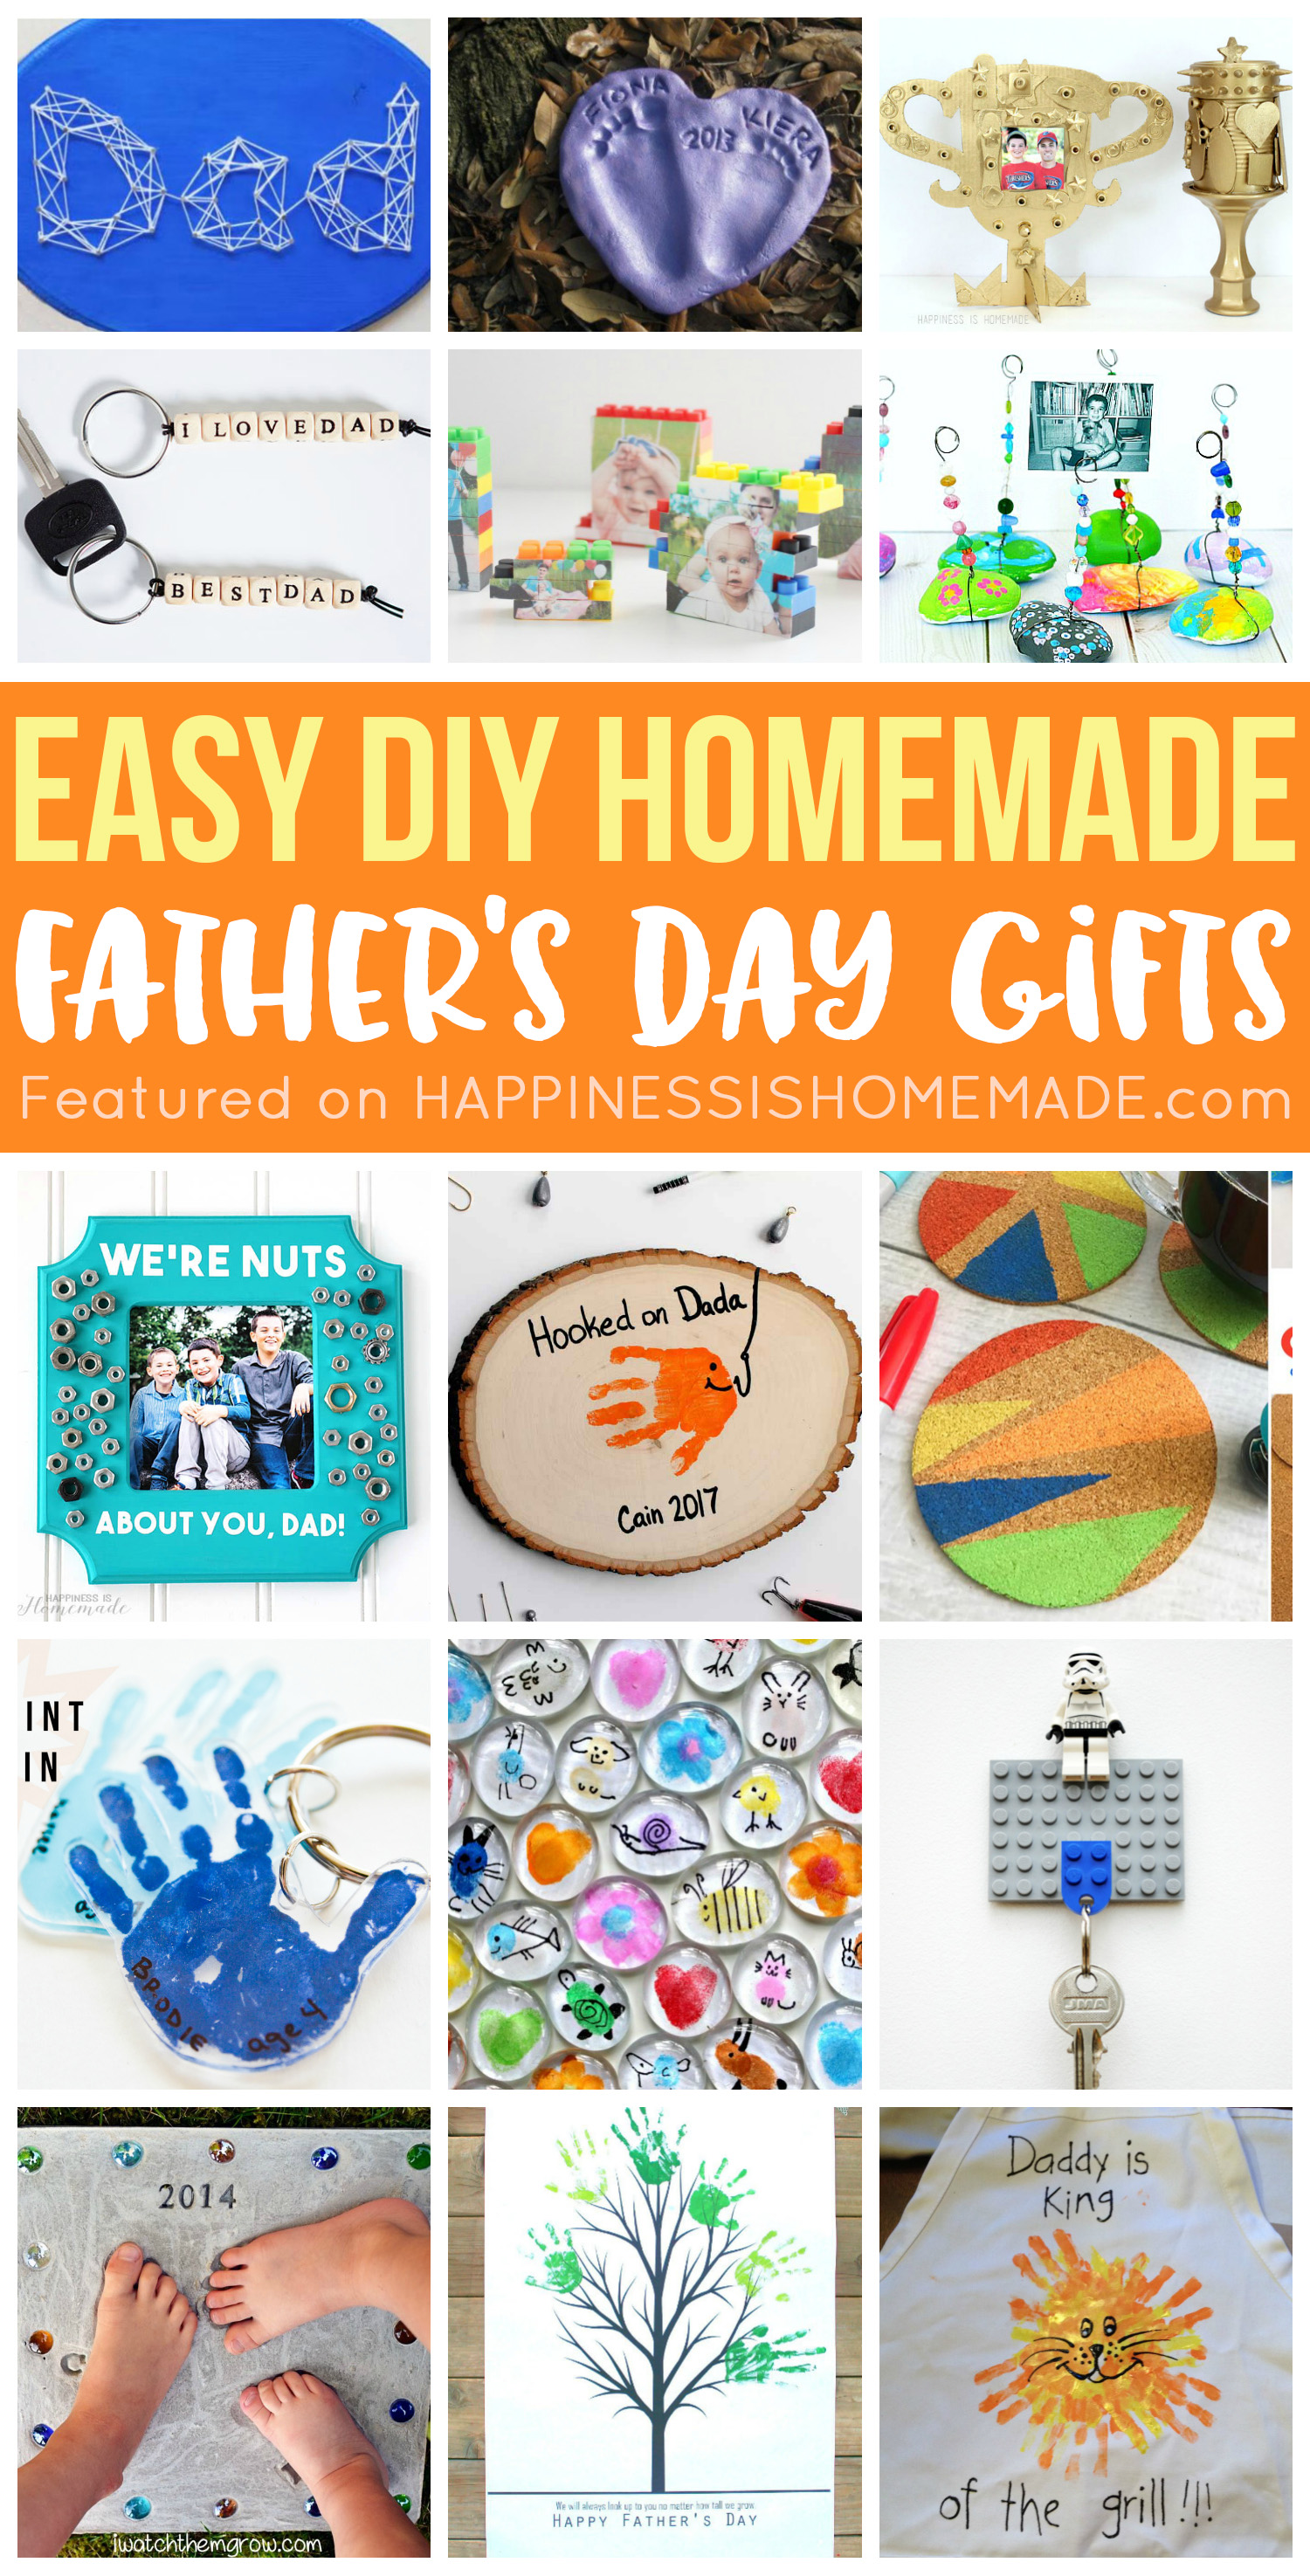 https://www.happinessishomemade.net/wp-content/uploads/2018/05/Easy-DIY-Homemade-Fathers-Day-Gifts.jpg